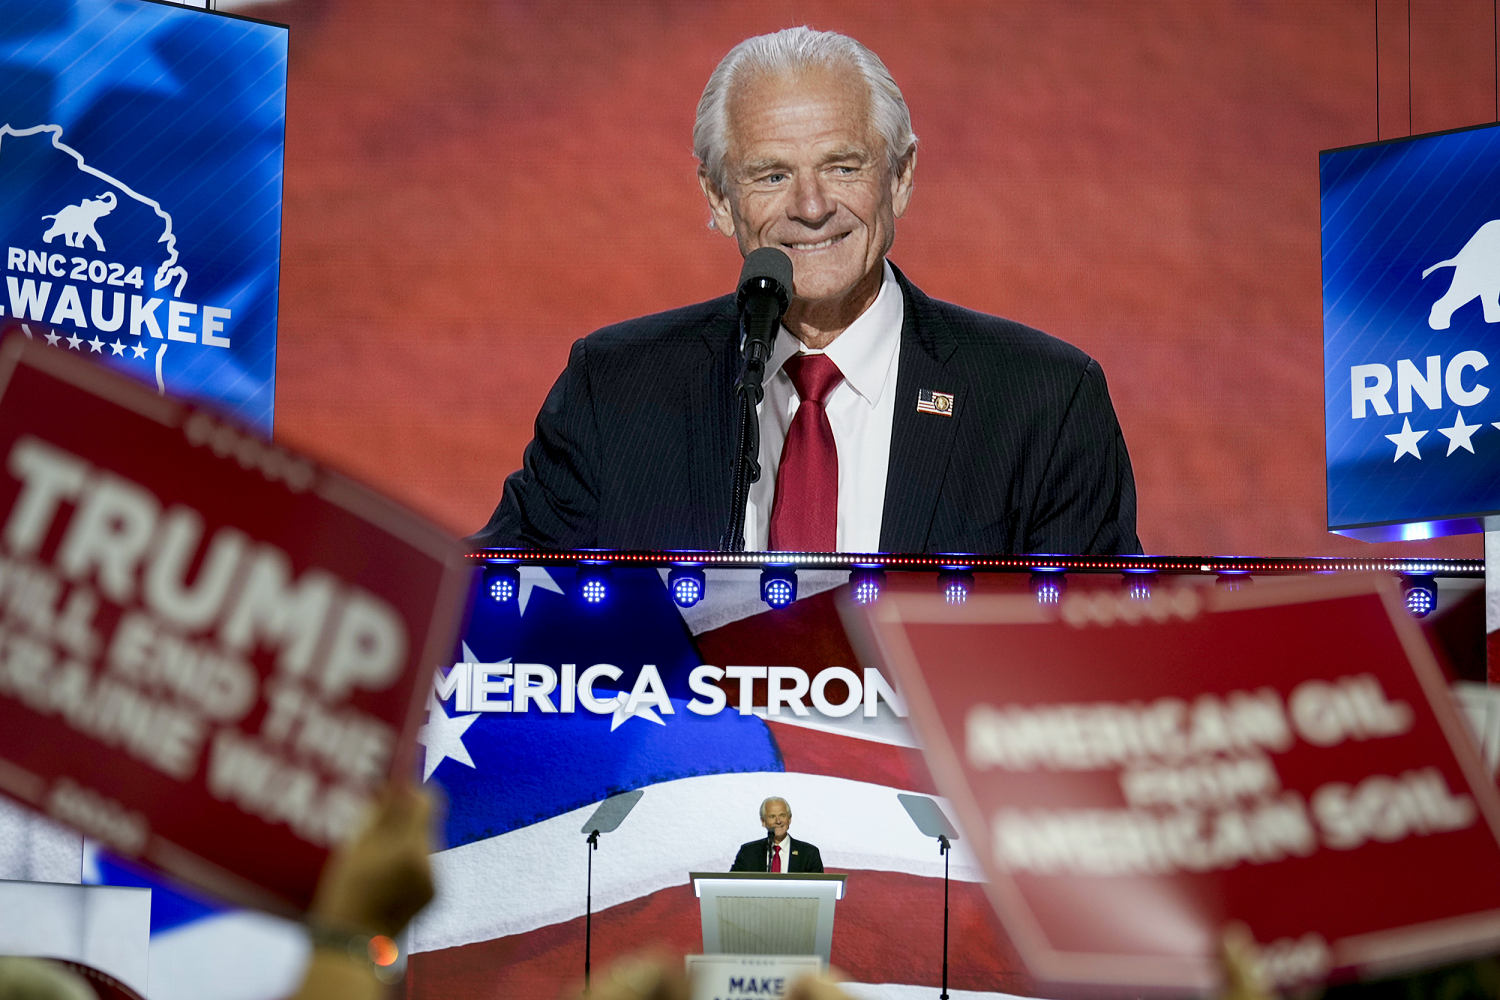 Out of prison, Peter Navarro receives hero’s welcome at RNC